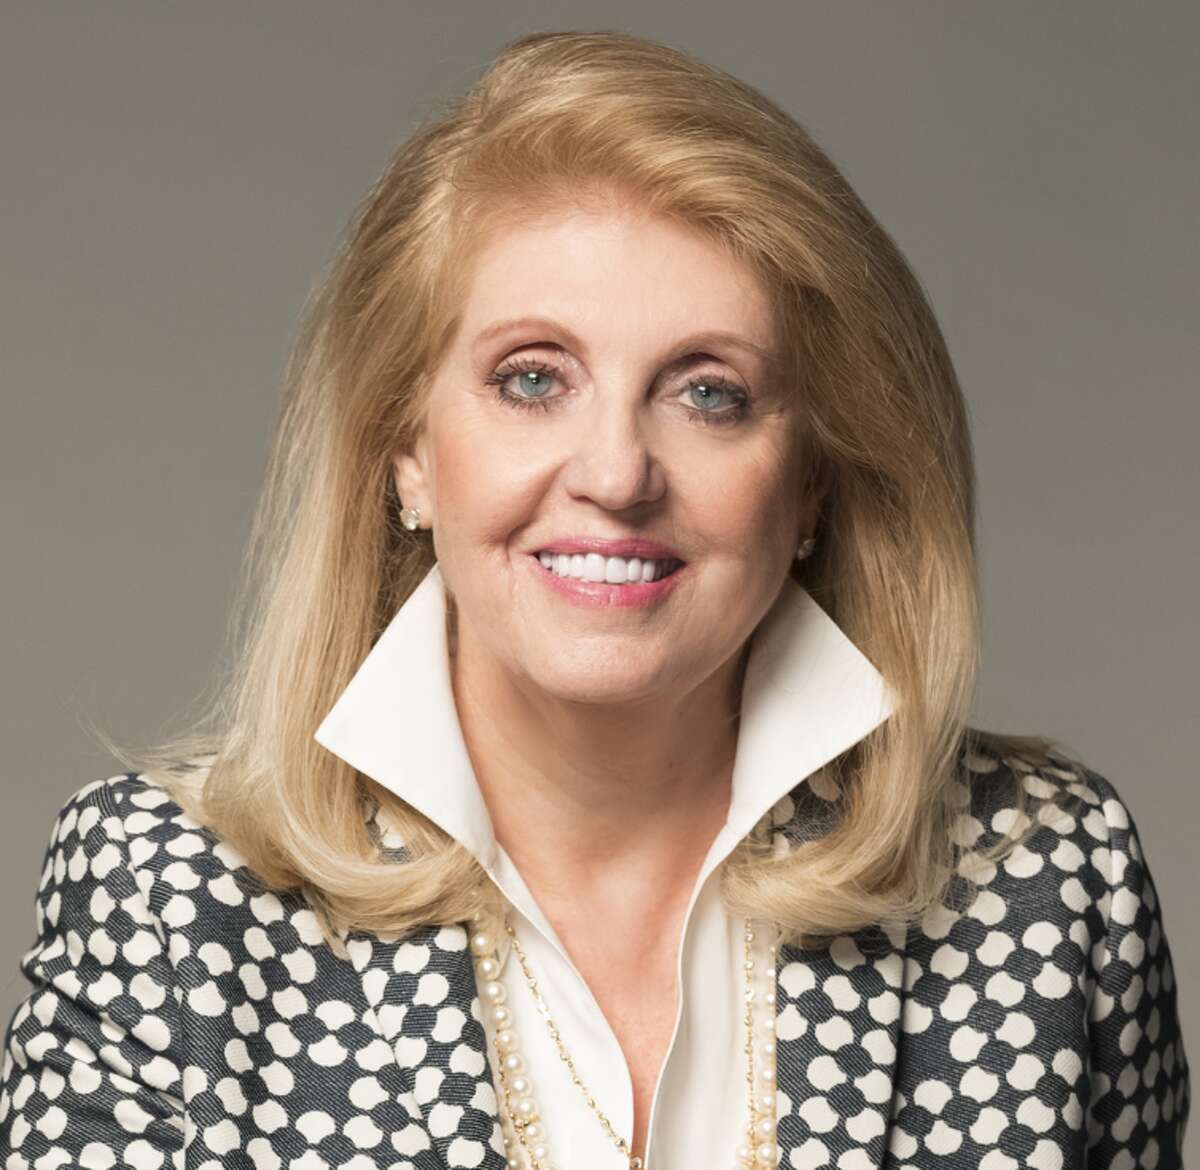 Lifetime Achievement Award  "Among the winners this year is Deborah Bauer for the Lifetime Achievement Award. After founding Drake Commercial Group in 1989, Deborah has found local and national acclaim for her work in the commercial real estate field, a field typically dominated by men."